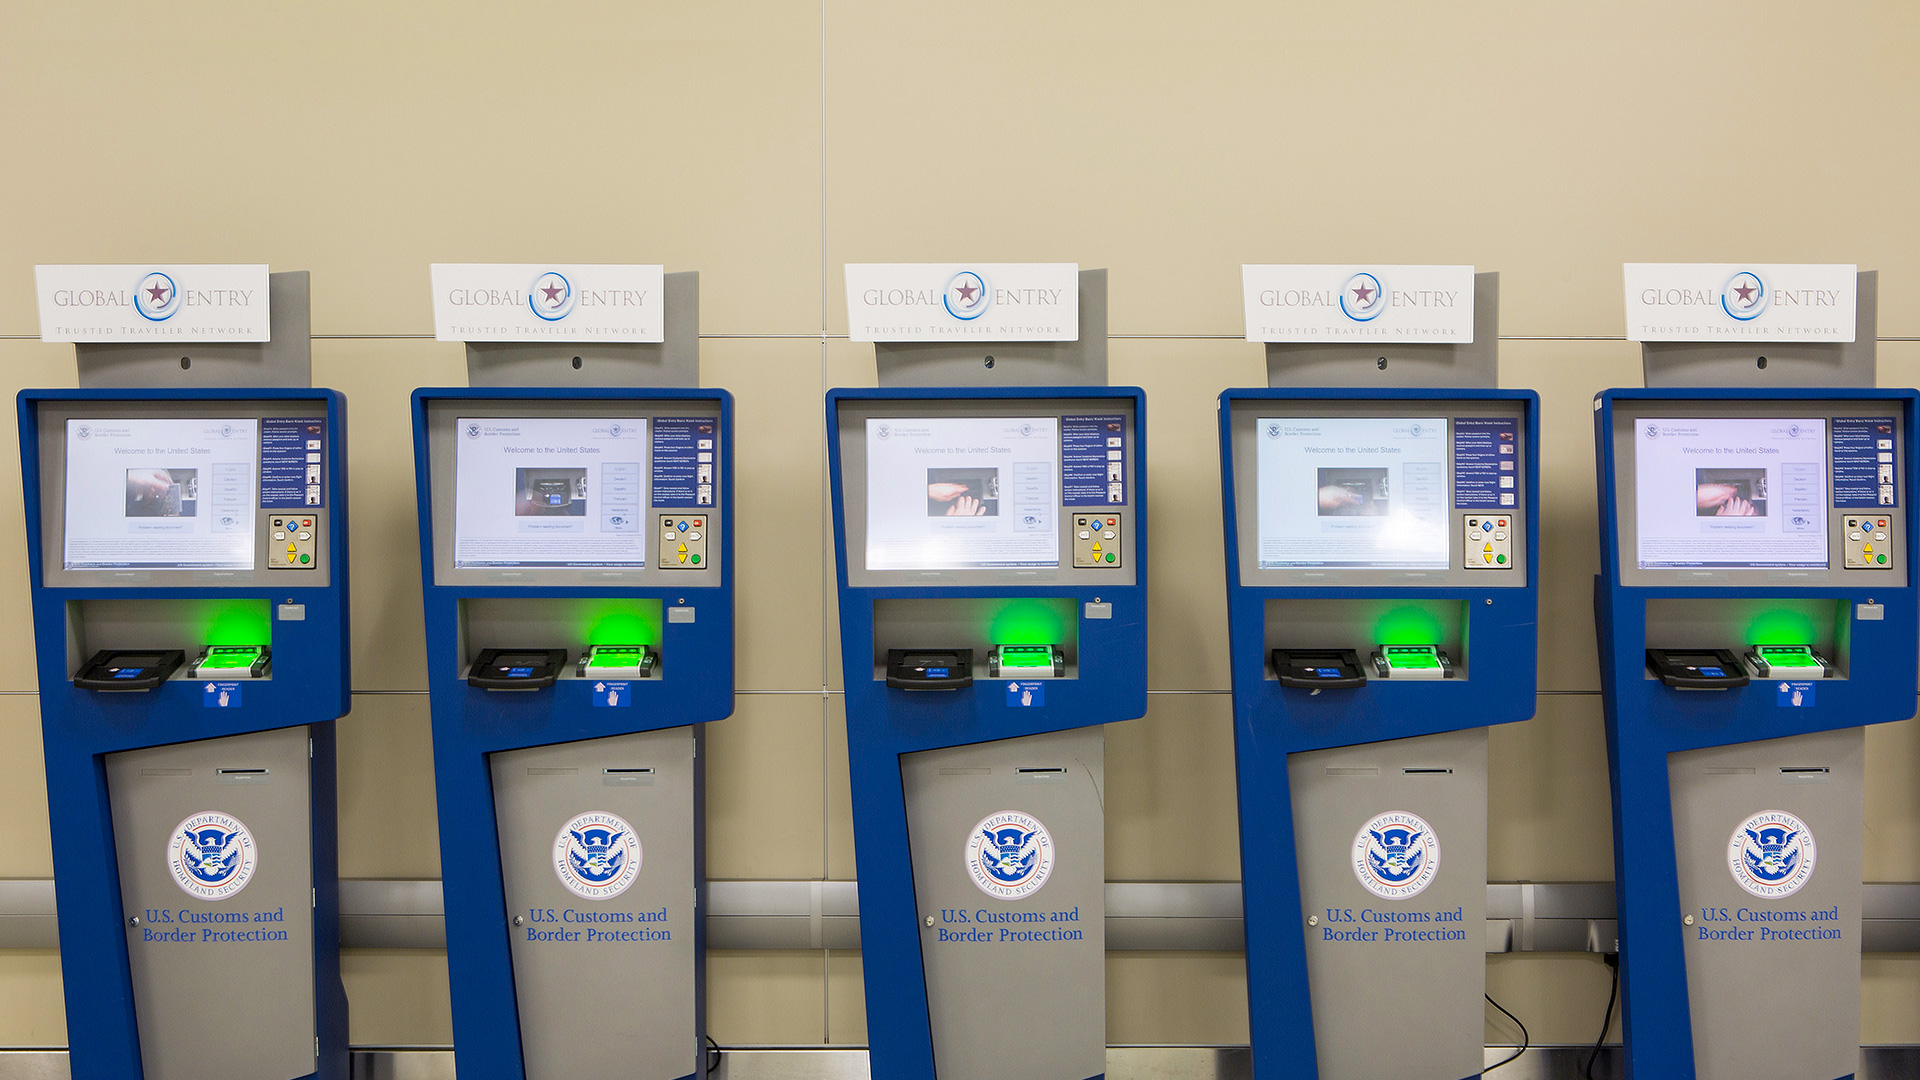 How to Do a Global Entry Enrollment Interview on Arrival | SmarterTravel